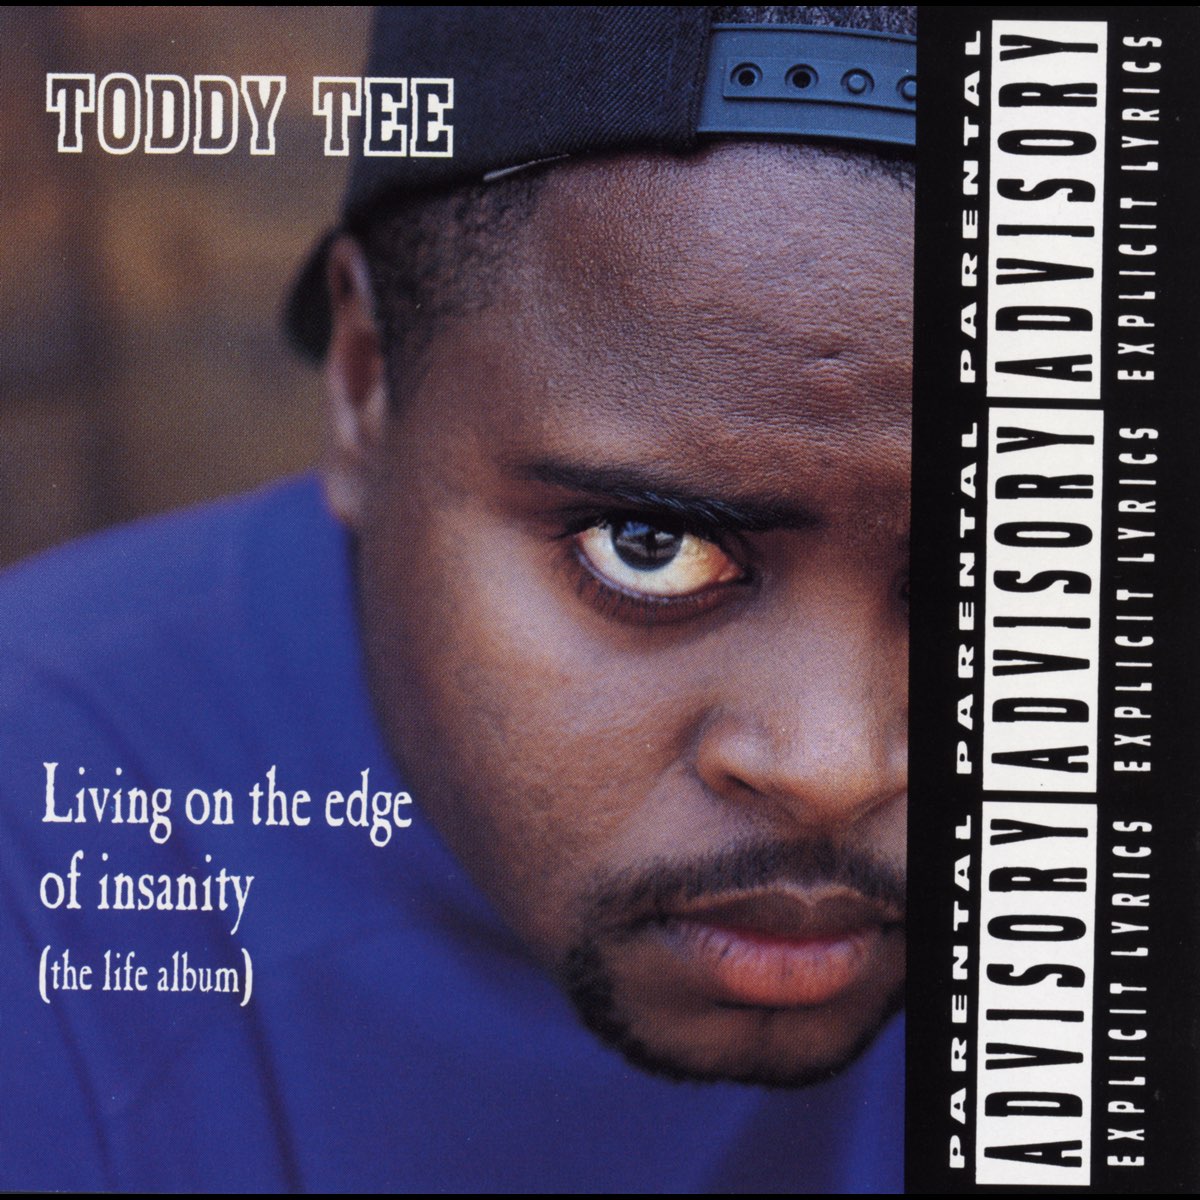 Living On The Edge Of Insanity (The Life Album) By Toddy Tee On Apple Music